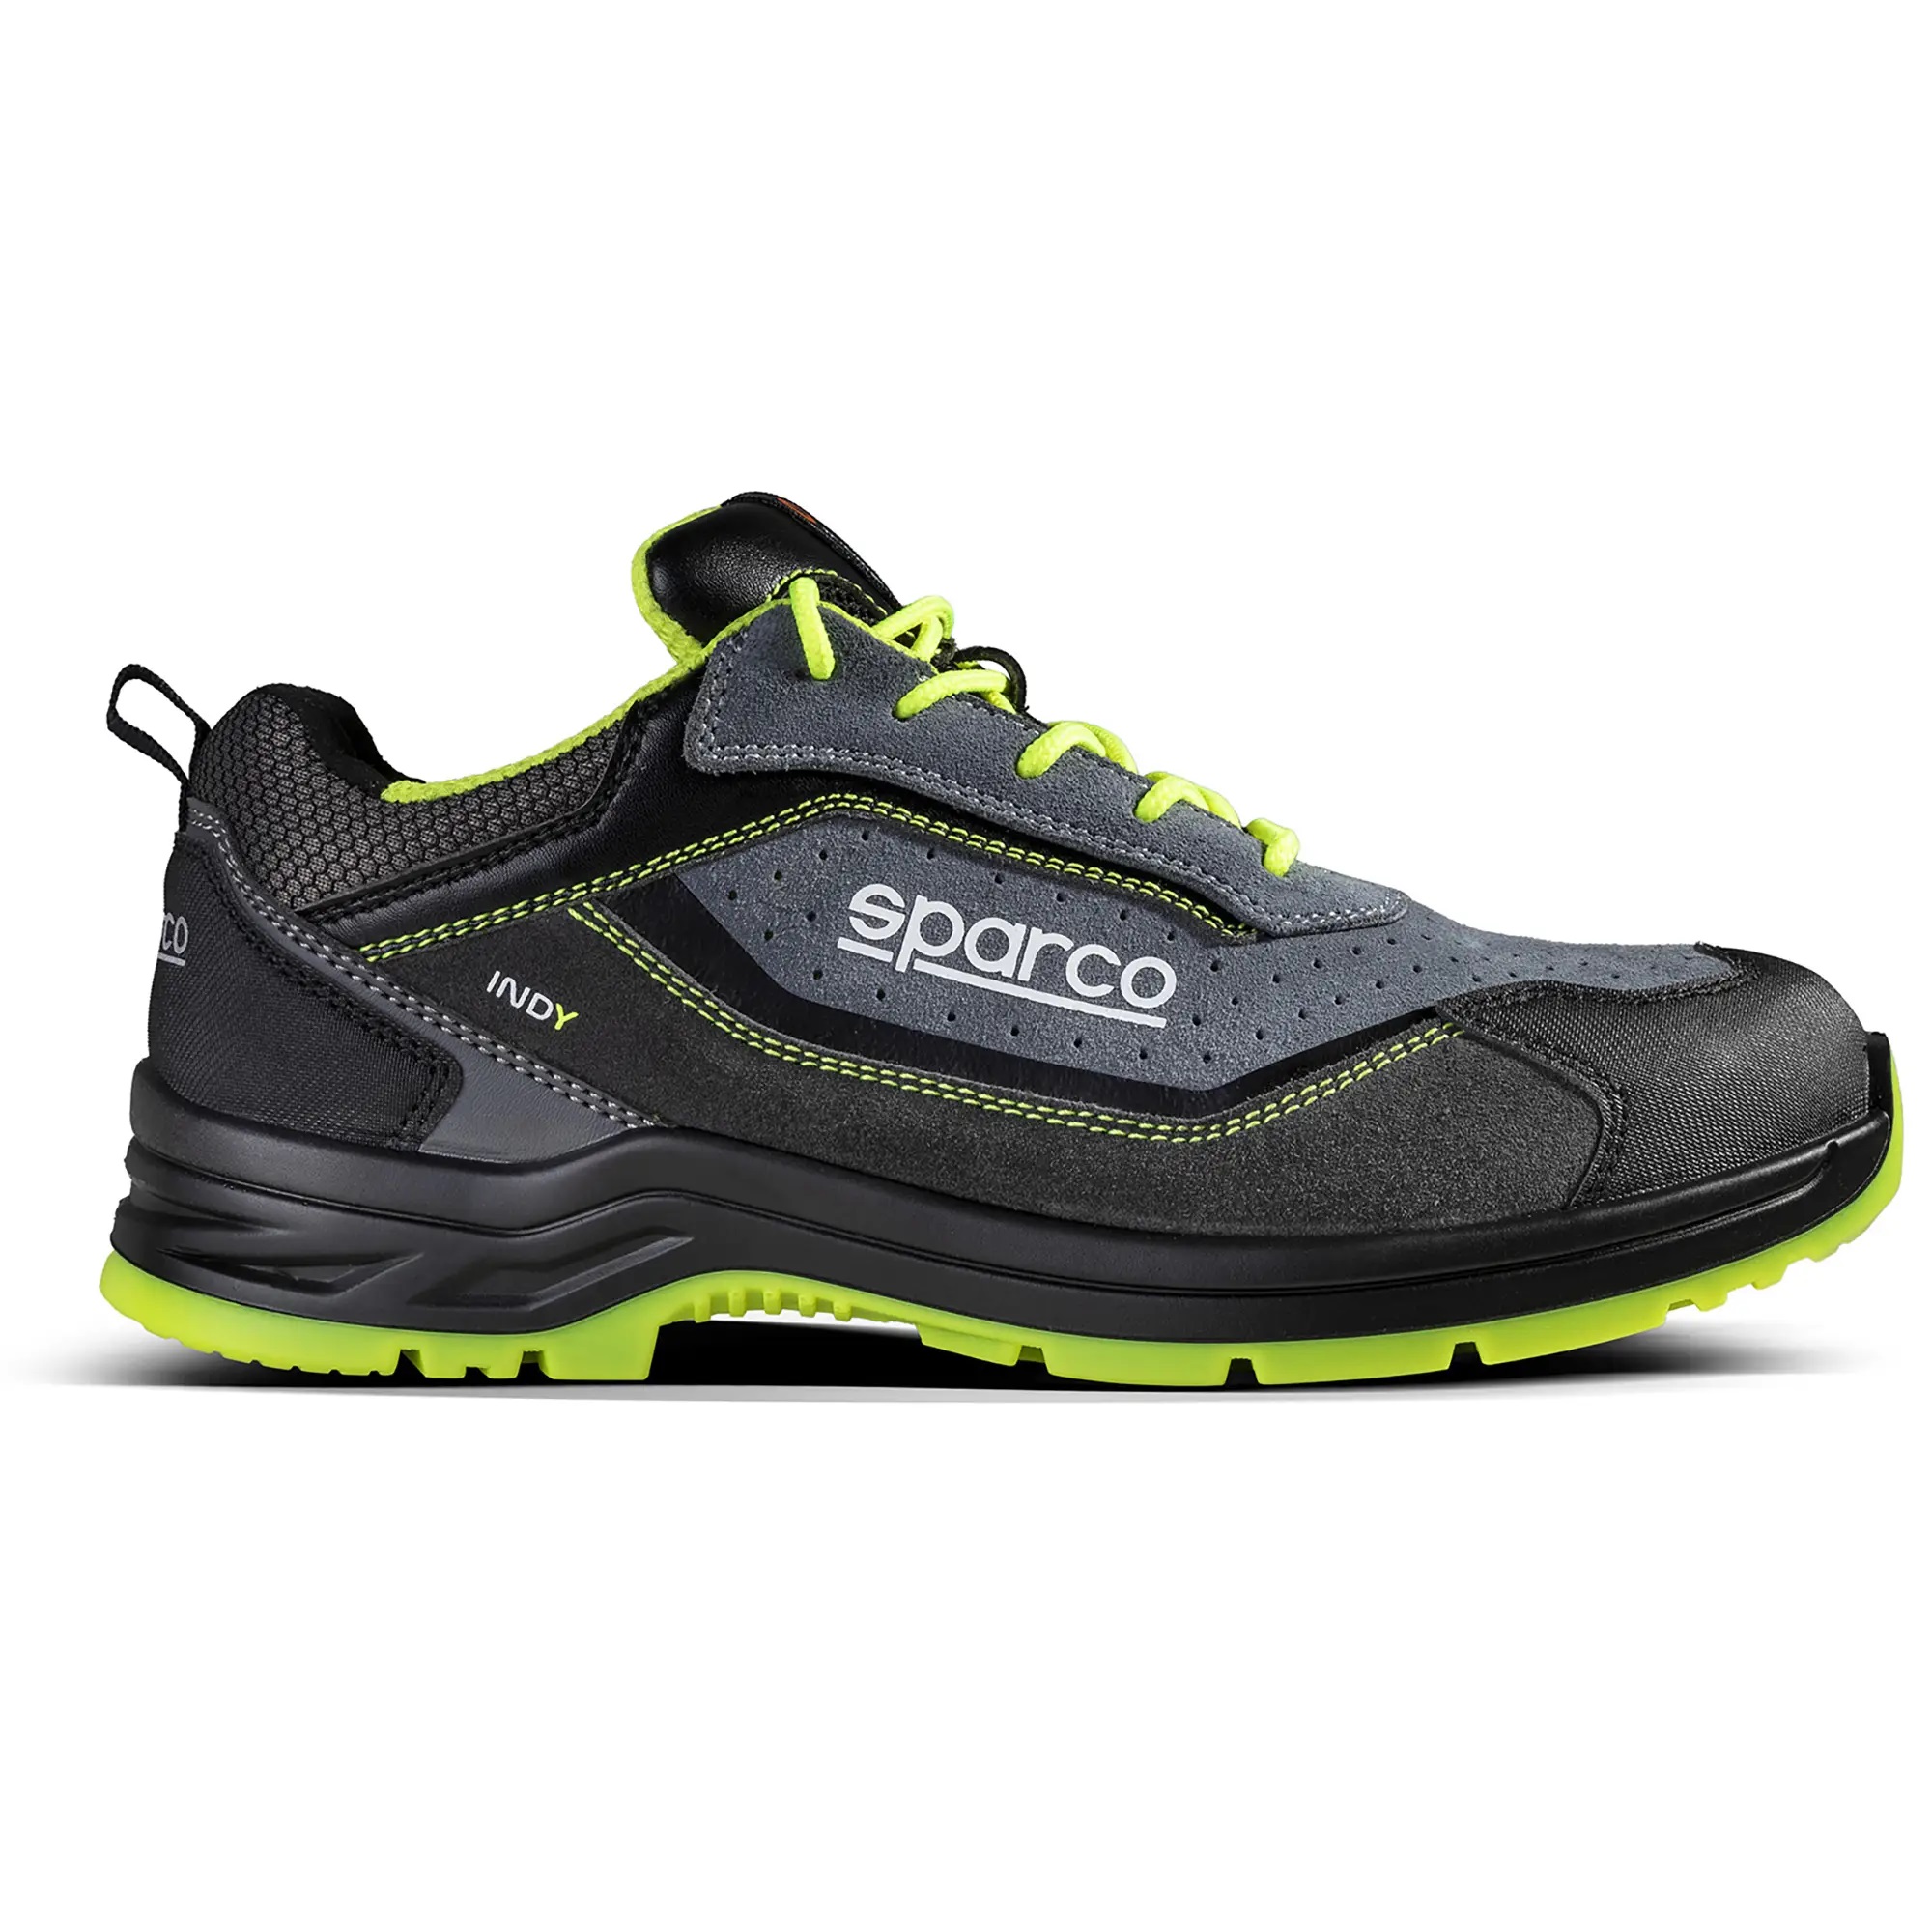 Scarpa bassa SPARCO S1PS INDY TEXAS Antinfortunistica